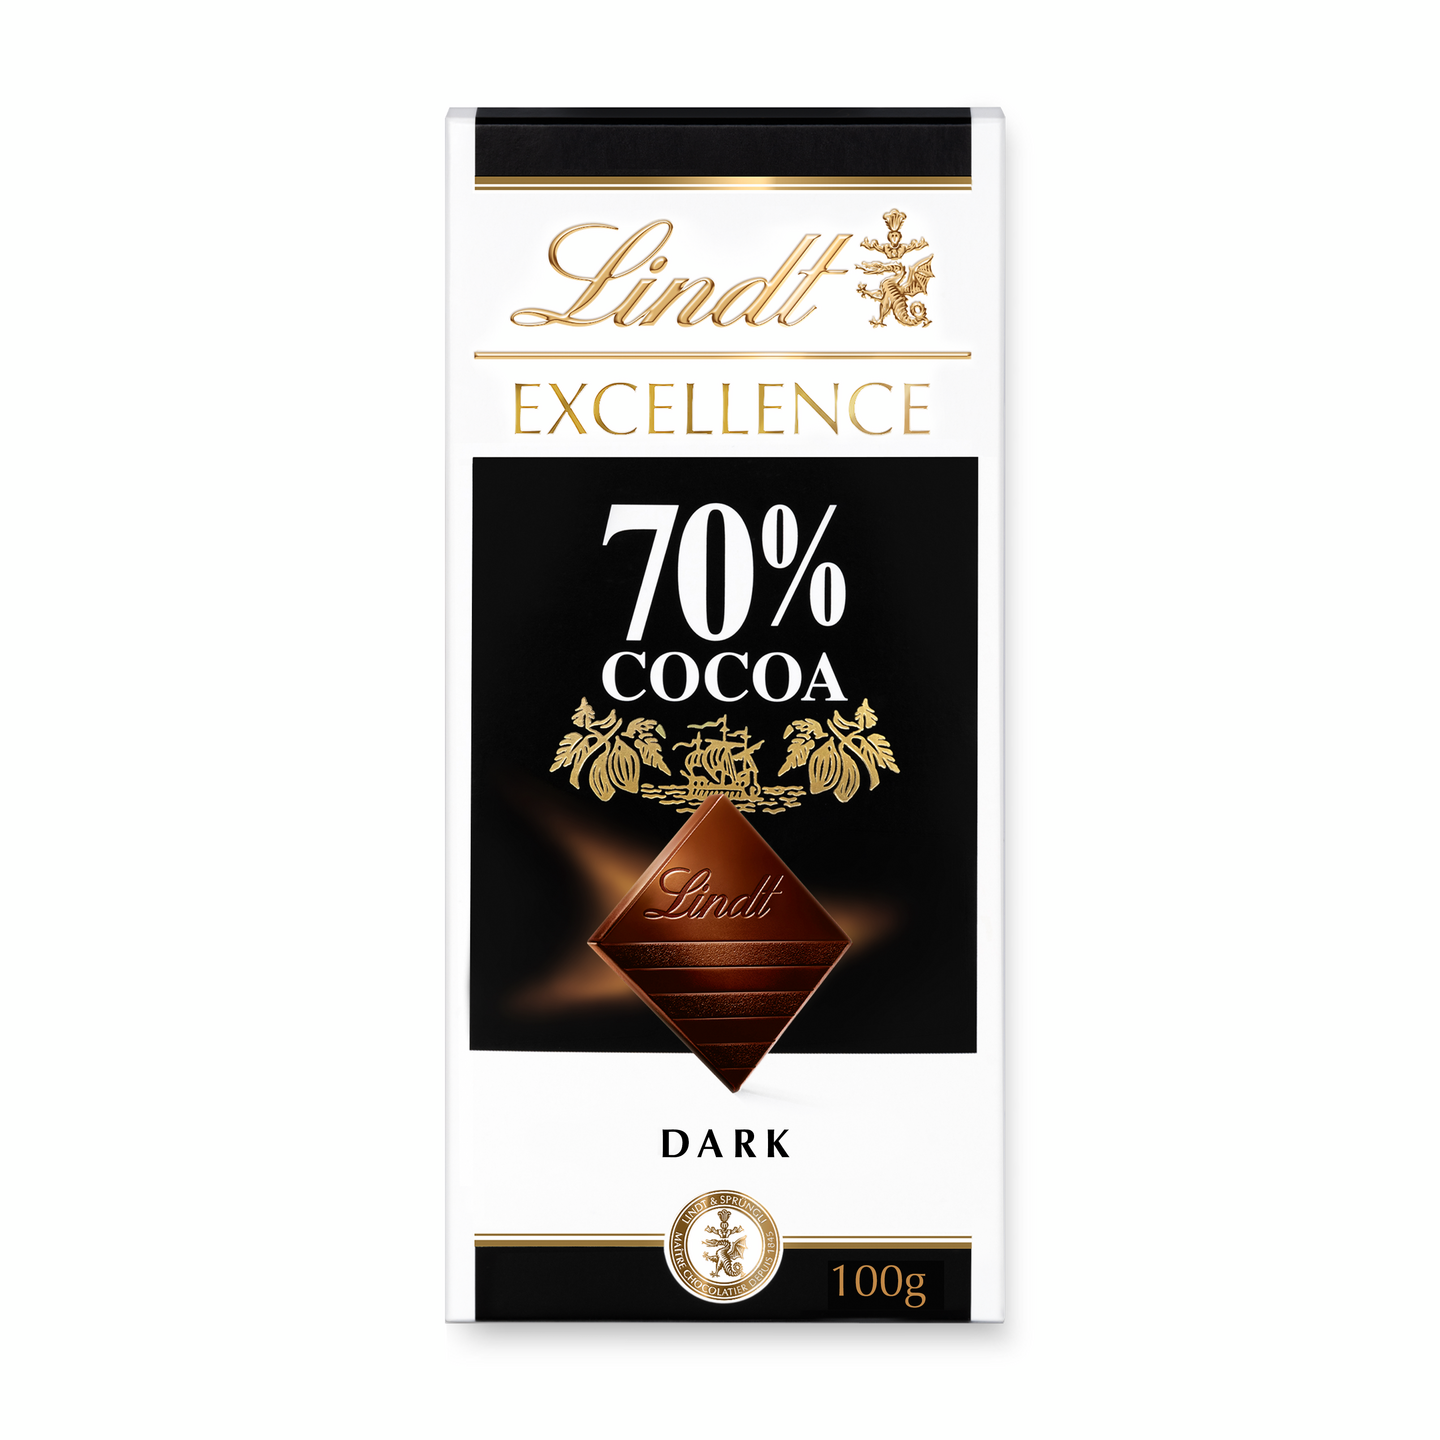 Lindt EXCELLENCE 70% tumma suklaalevy 100g